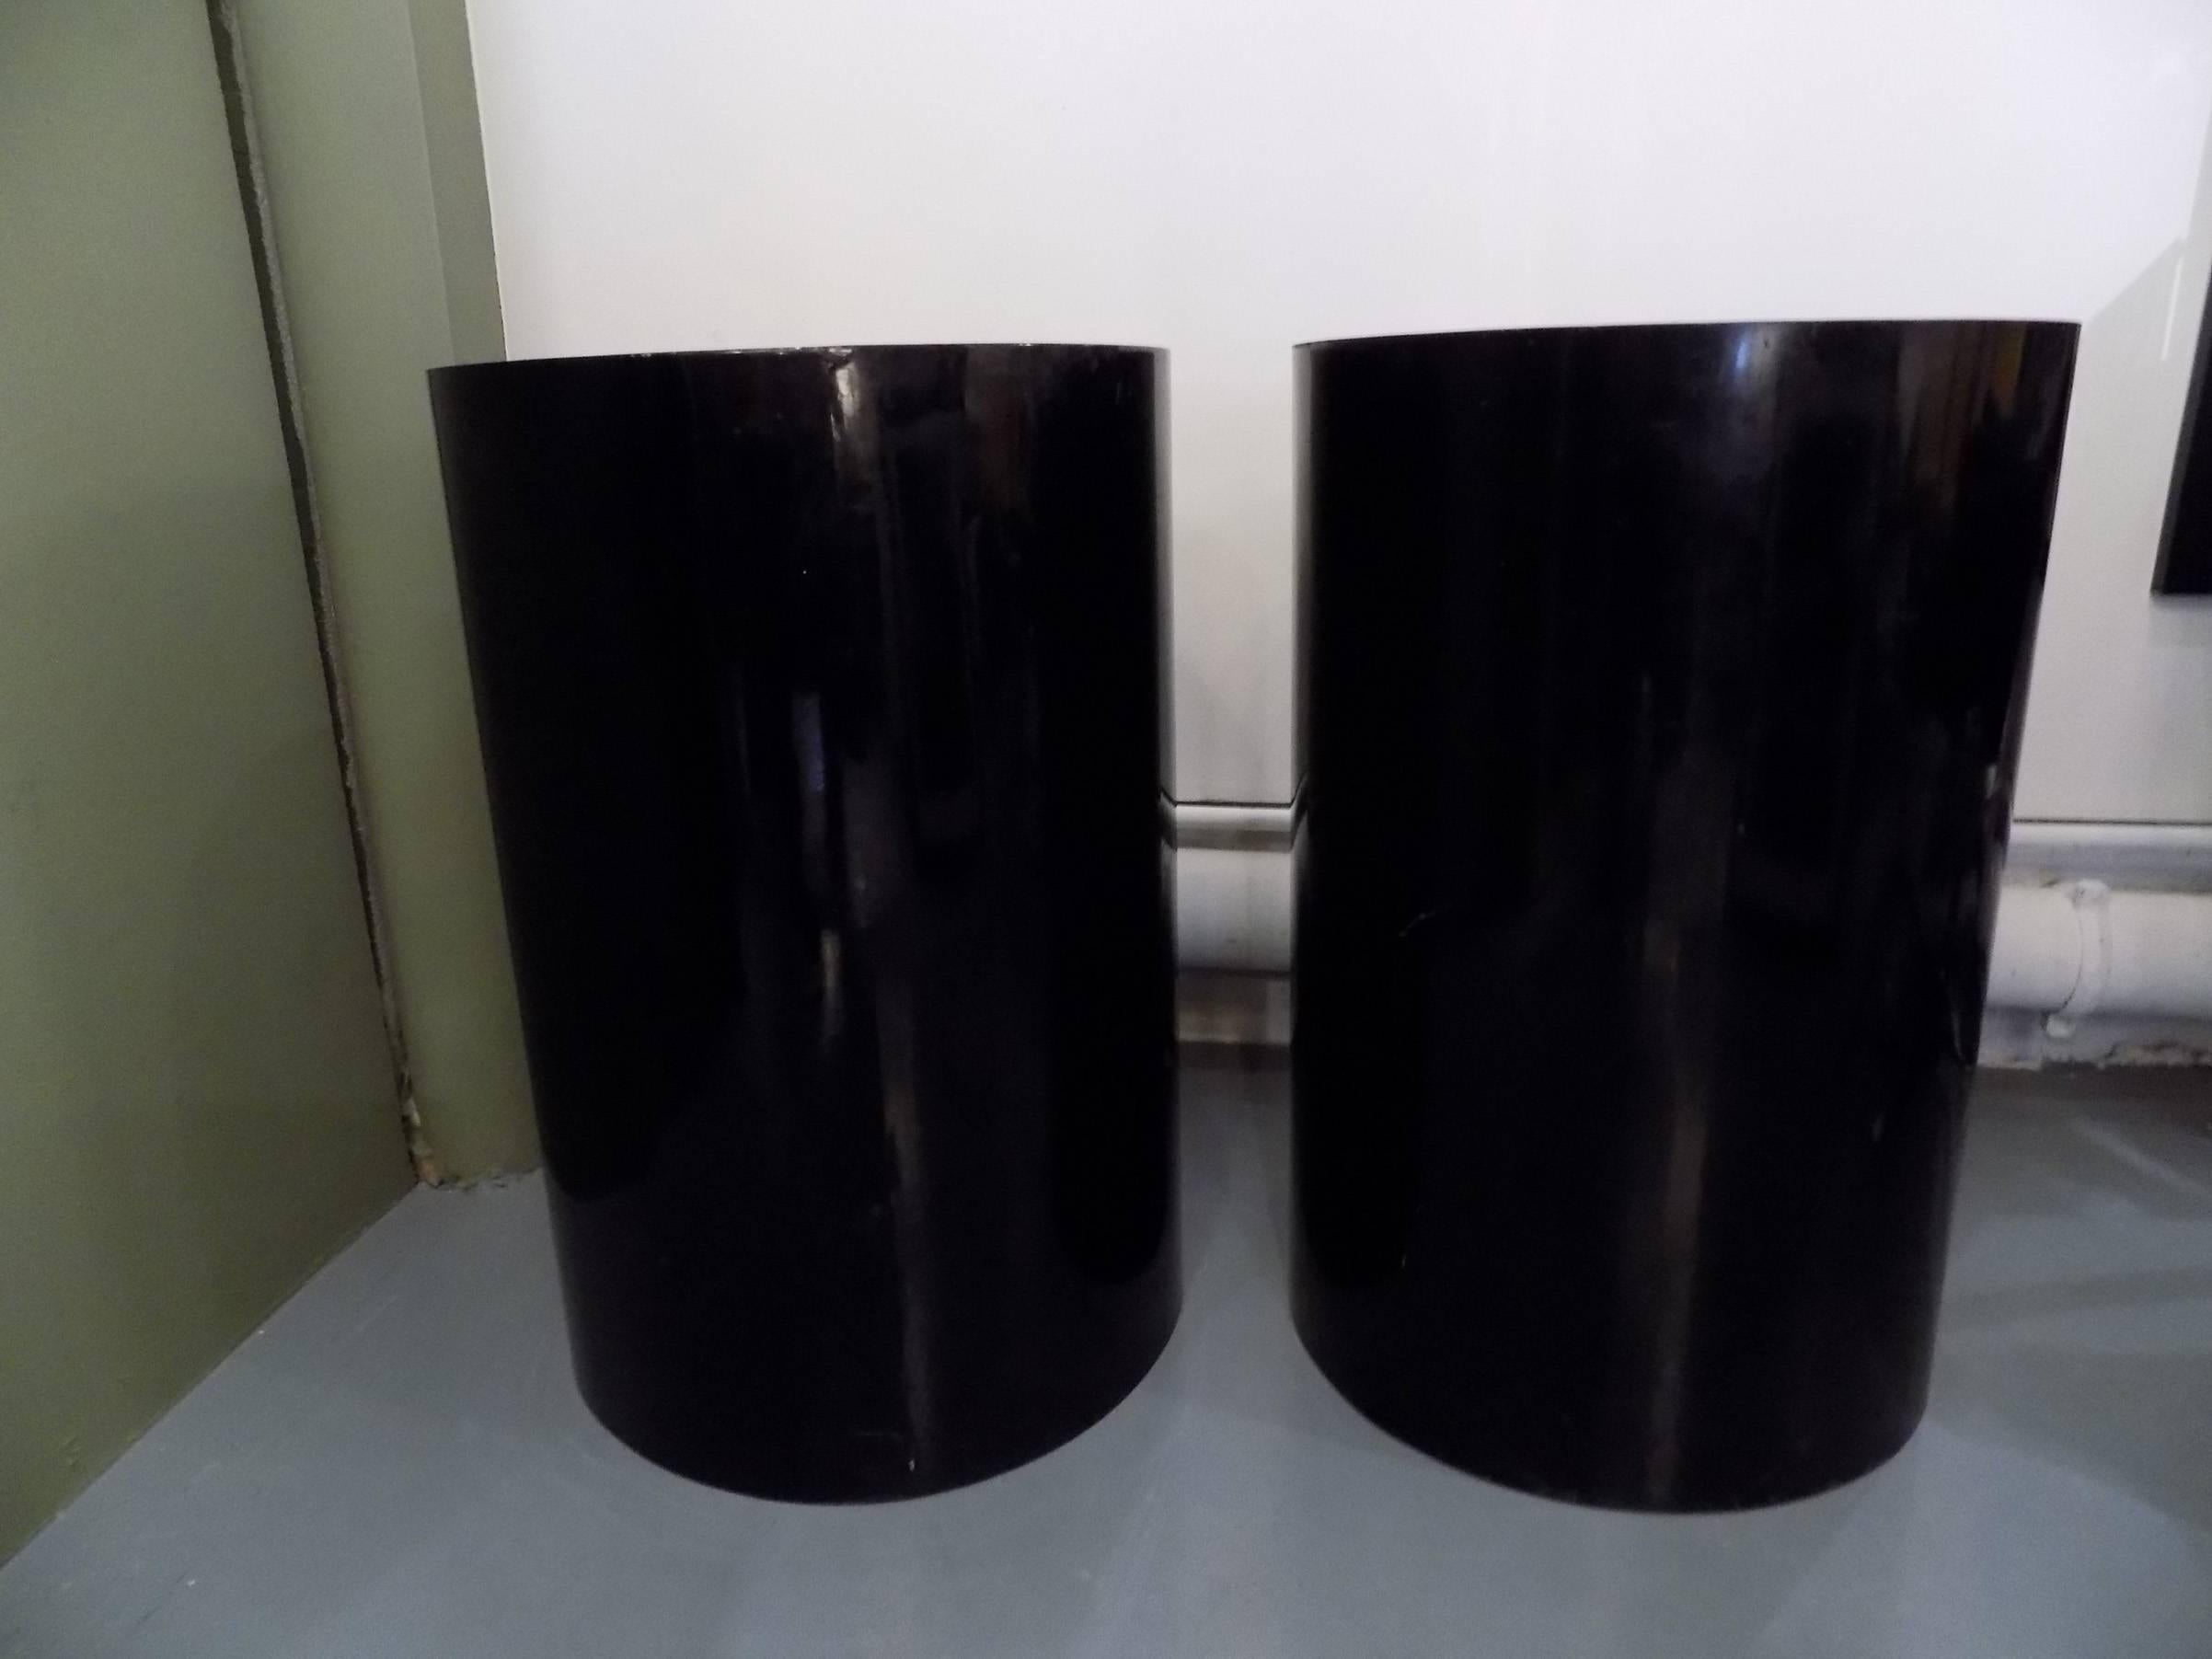 Pair of Italian cylindrical nightstands, circa 1960.
Black lacquered cylinder with a glass top with a beautiful effect.